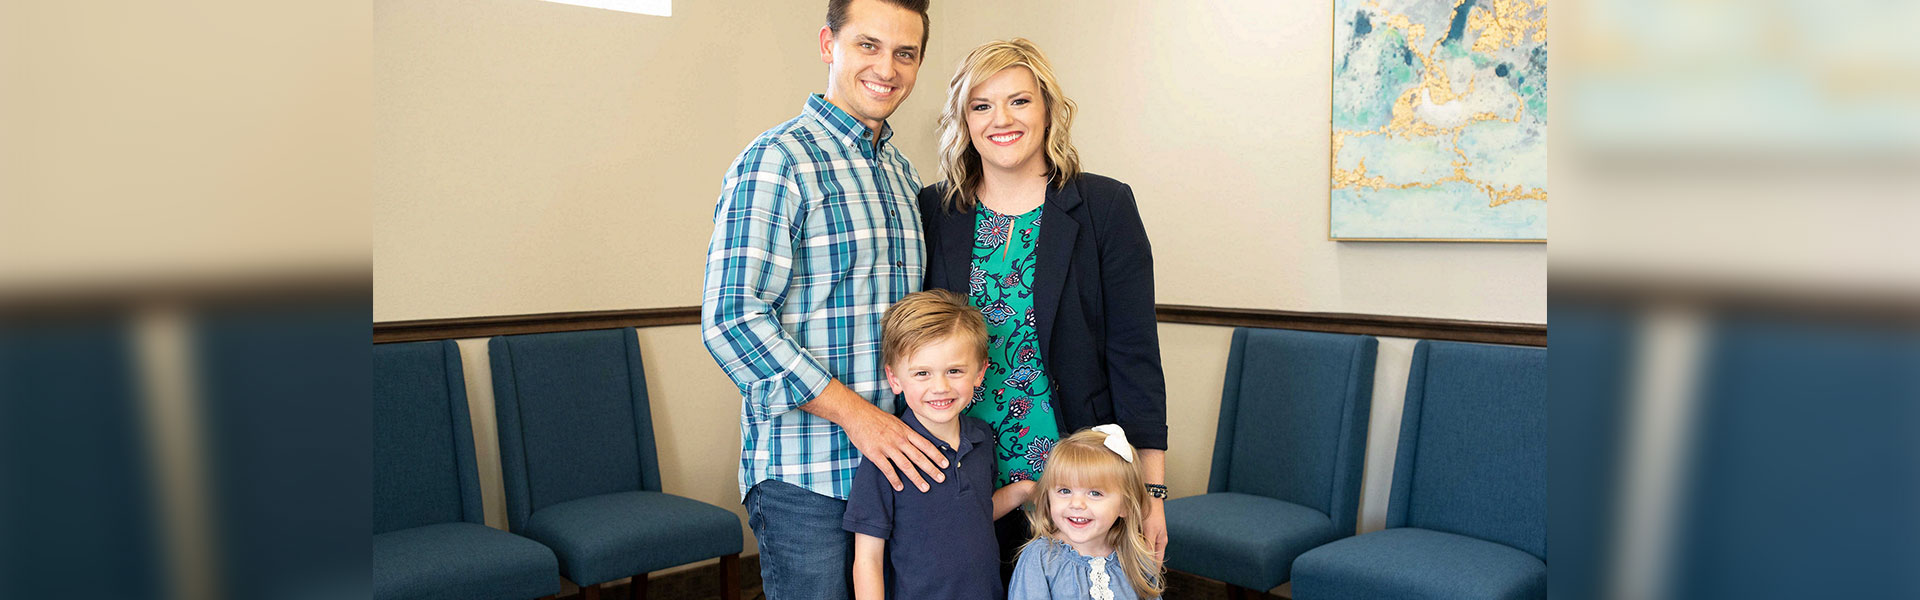 Dr. Maegan Elam with her family